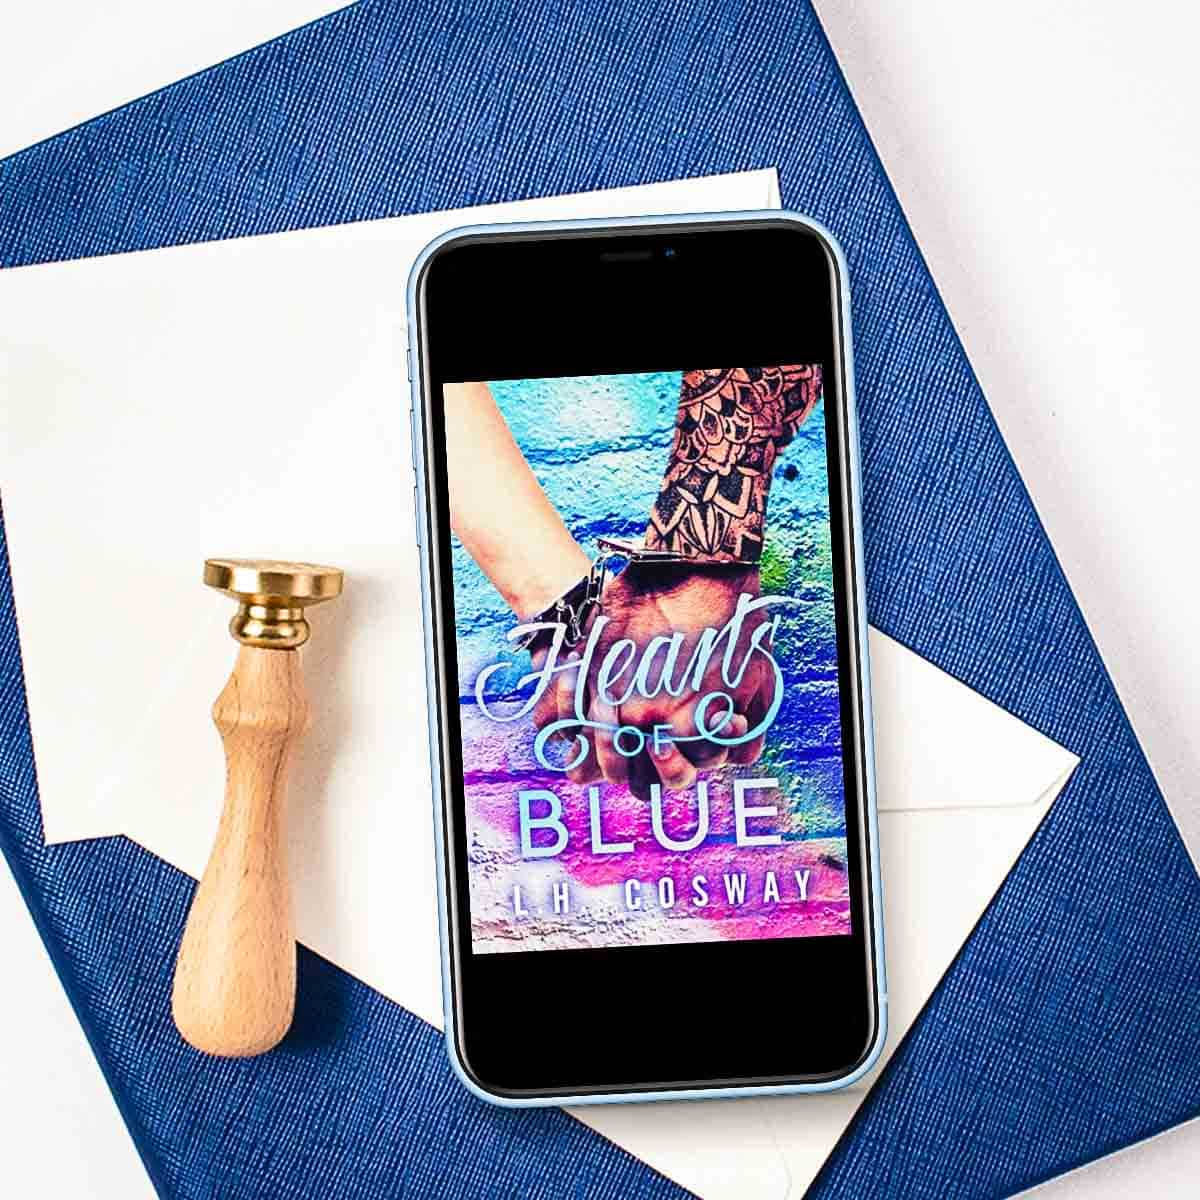 Hearts of Blue by LH Cosway, Book 4 of the Hearts series, is a forbidden love story between two star-crossed lovers. One is a cop and the other is a thief who lives by his own code.